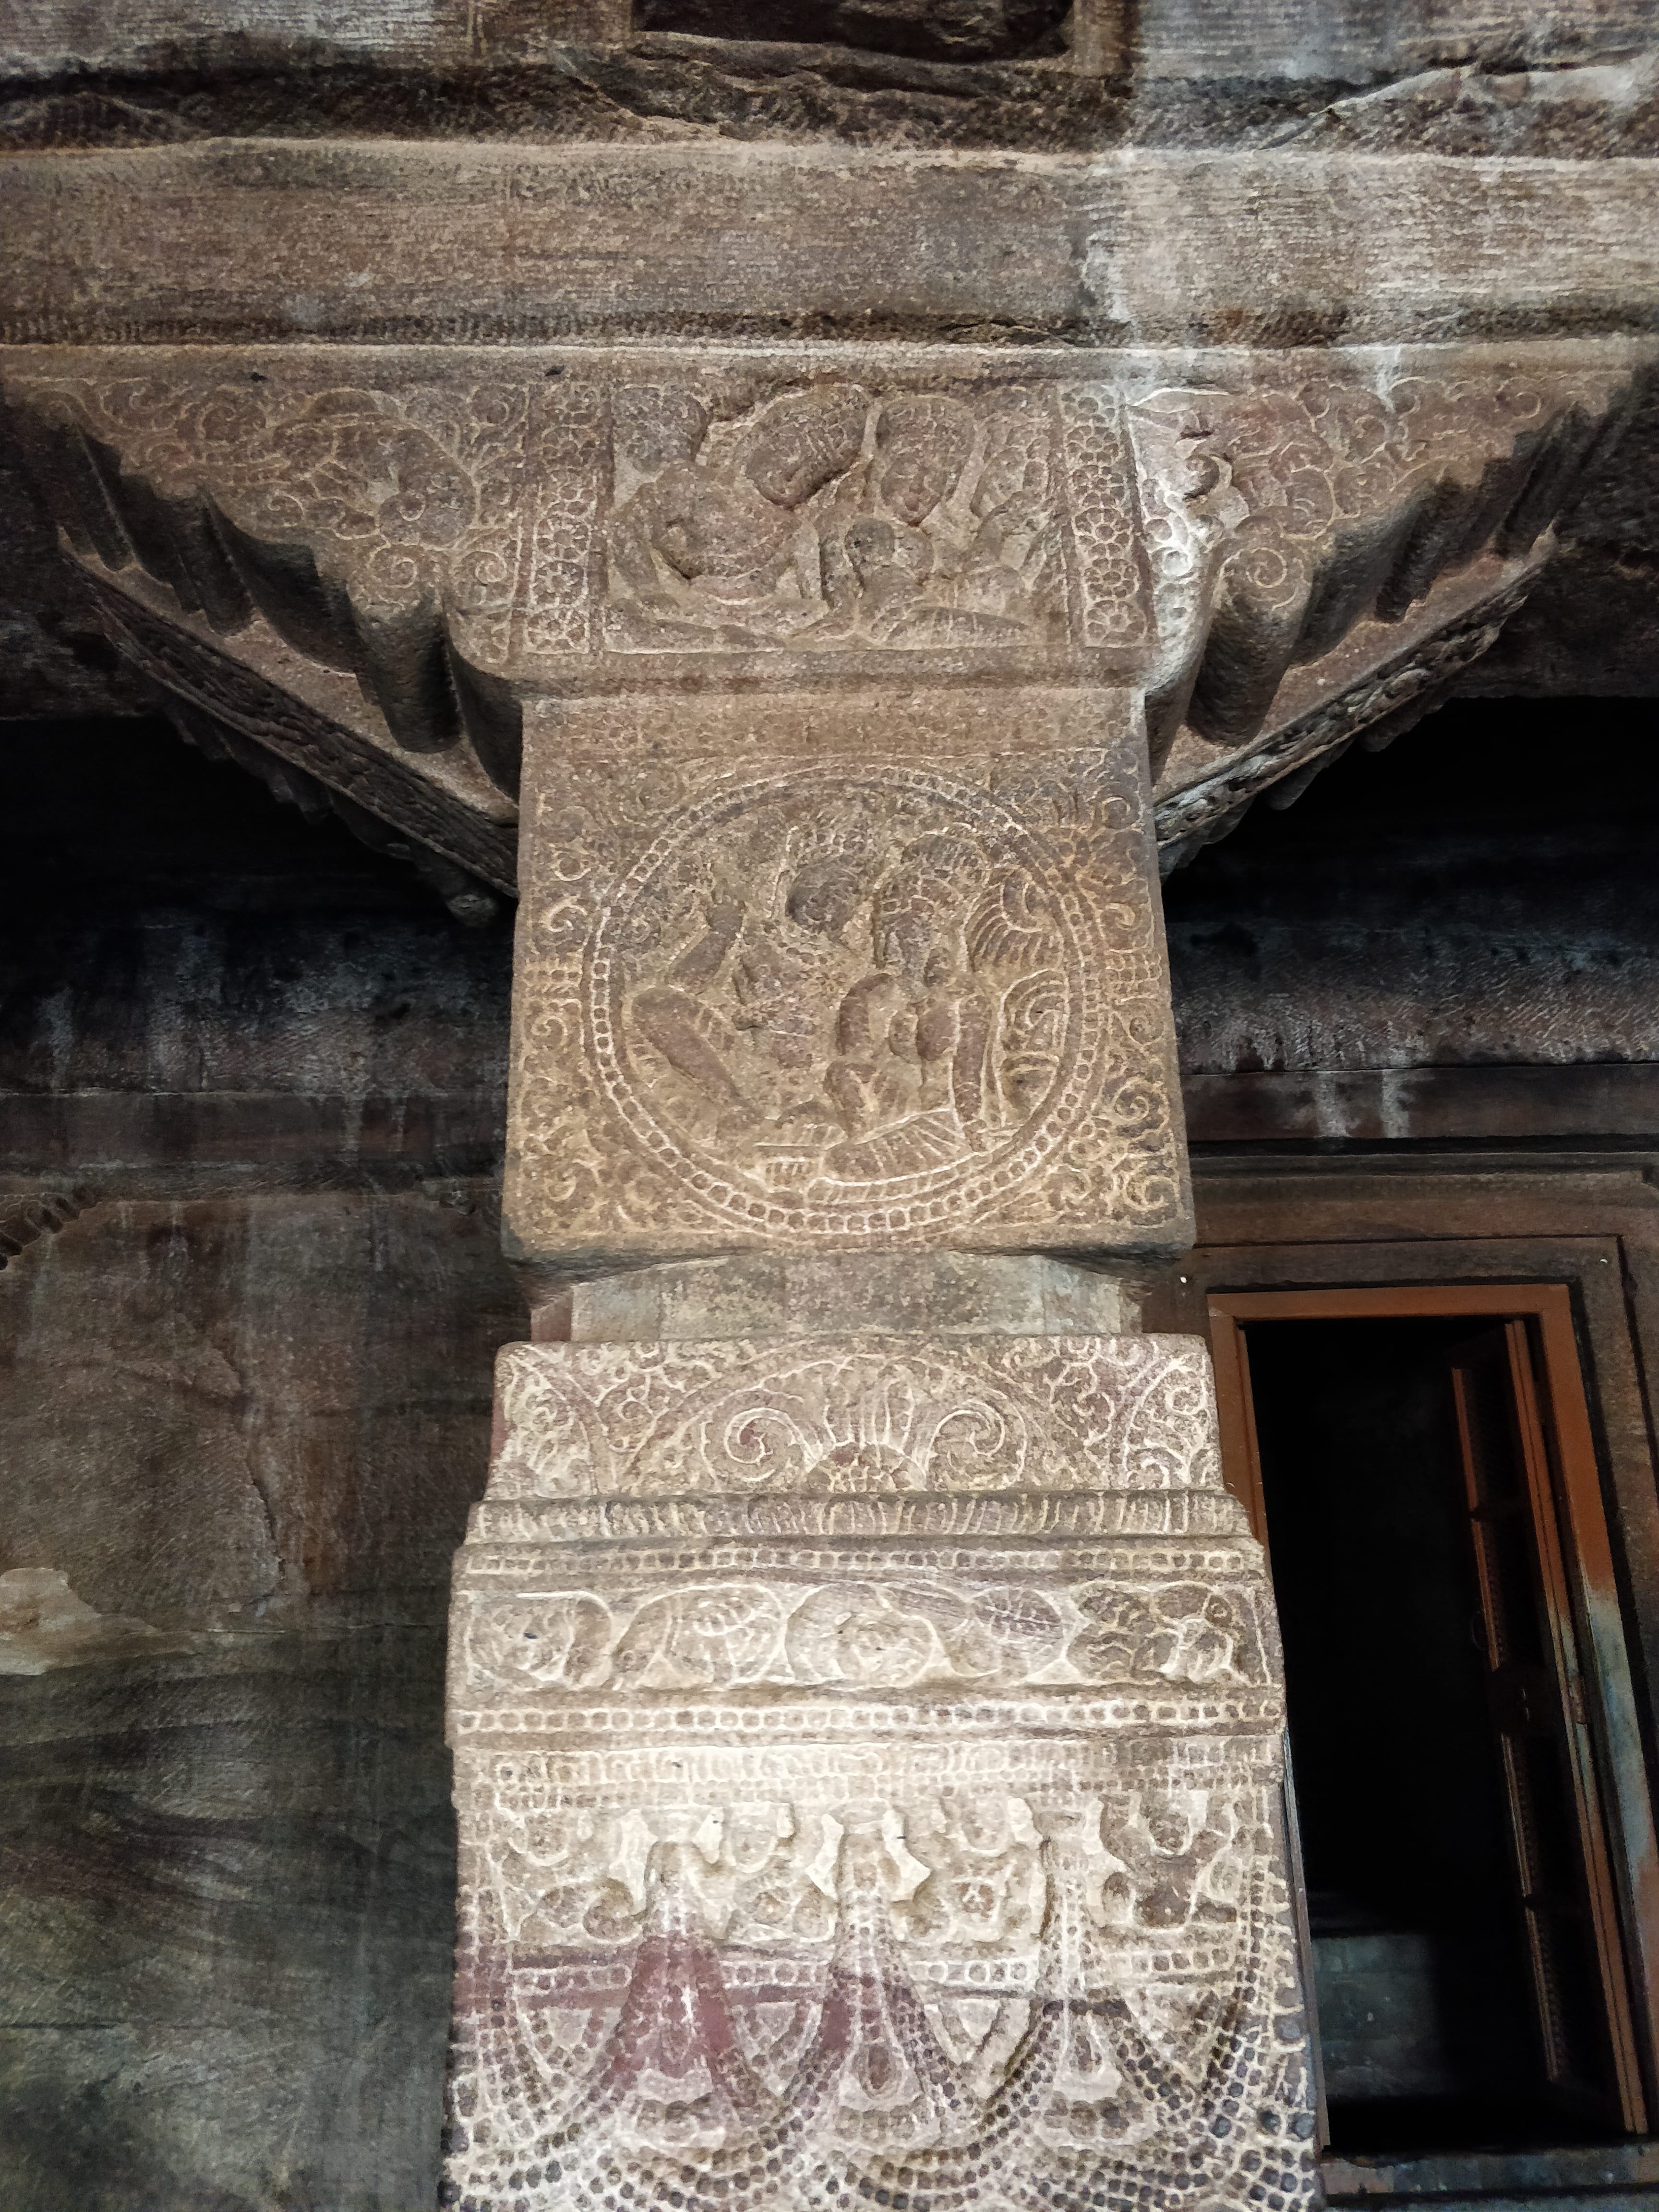 another pilar with carvings